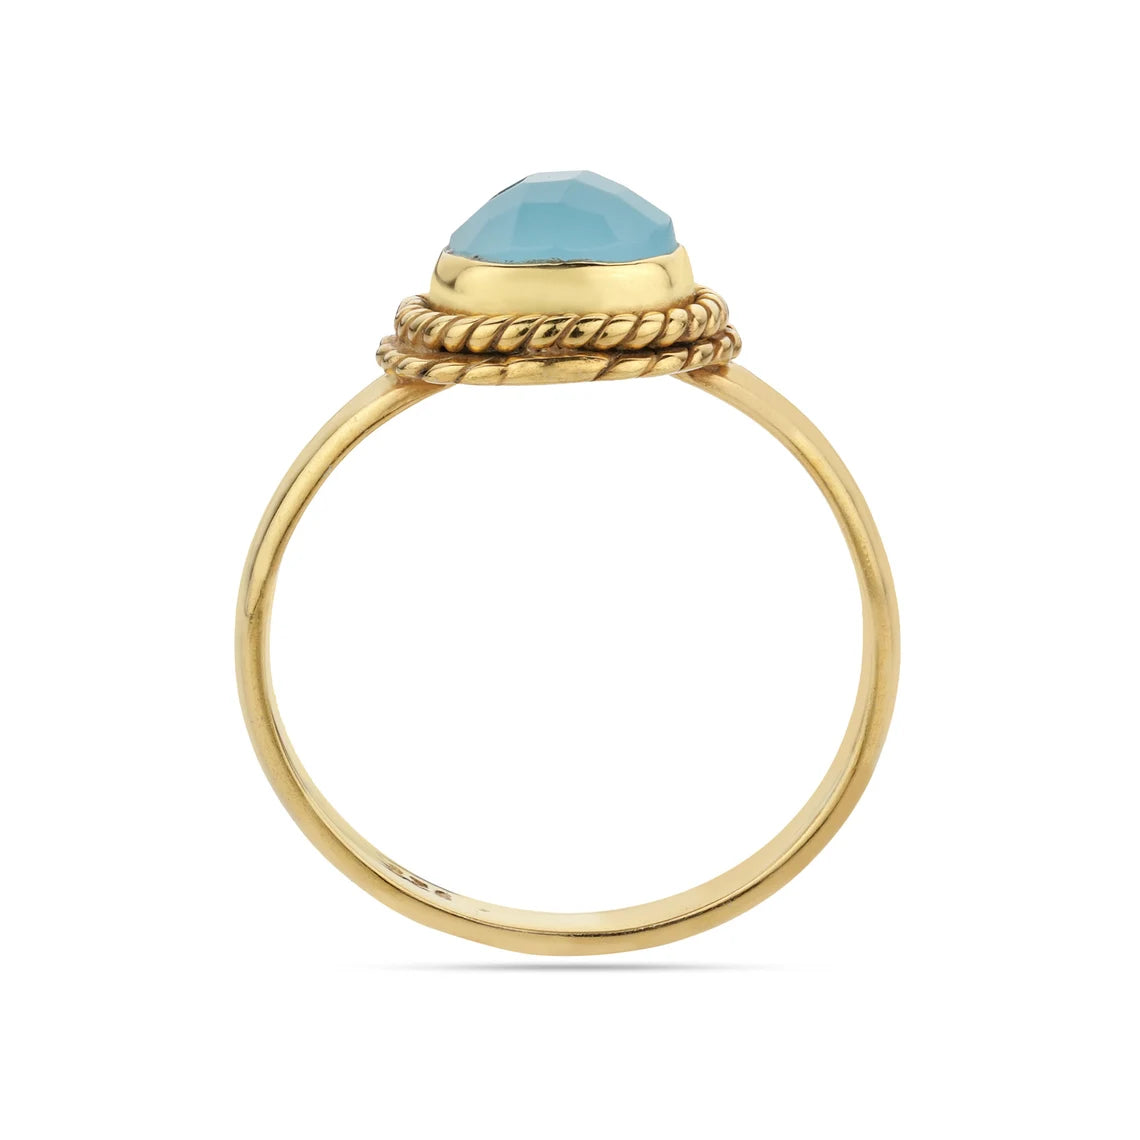 Blue Chalcedony Ring, 925 Sterling Silver Ring, Gold Plated Ring, Everyday Ring, Handmade Ring, Stackable Ring, Proposal Ring, Round Ring